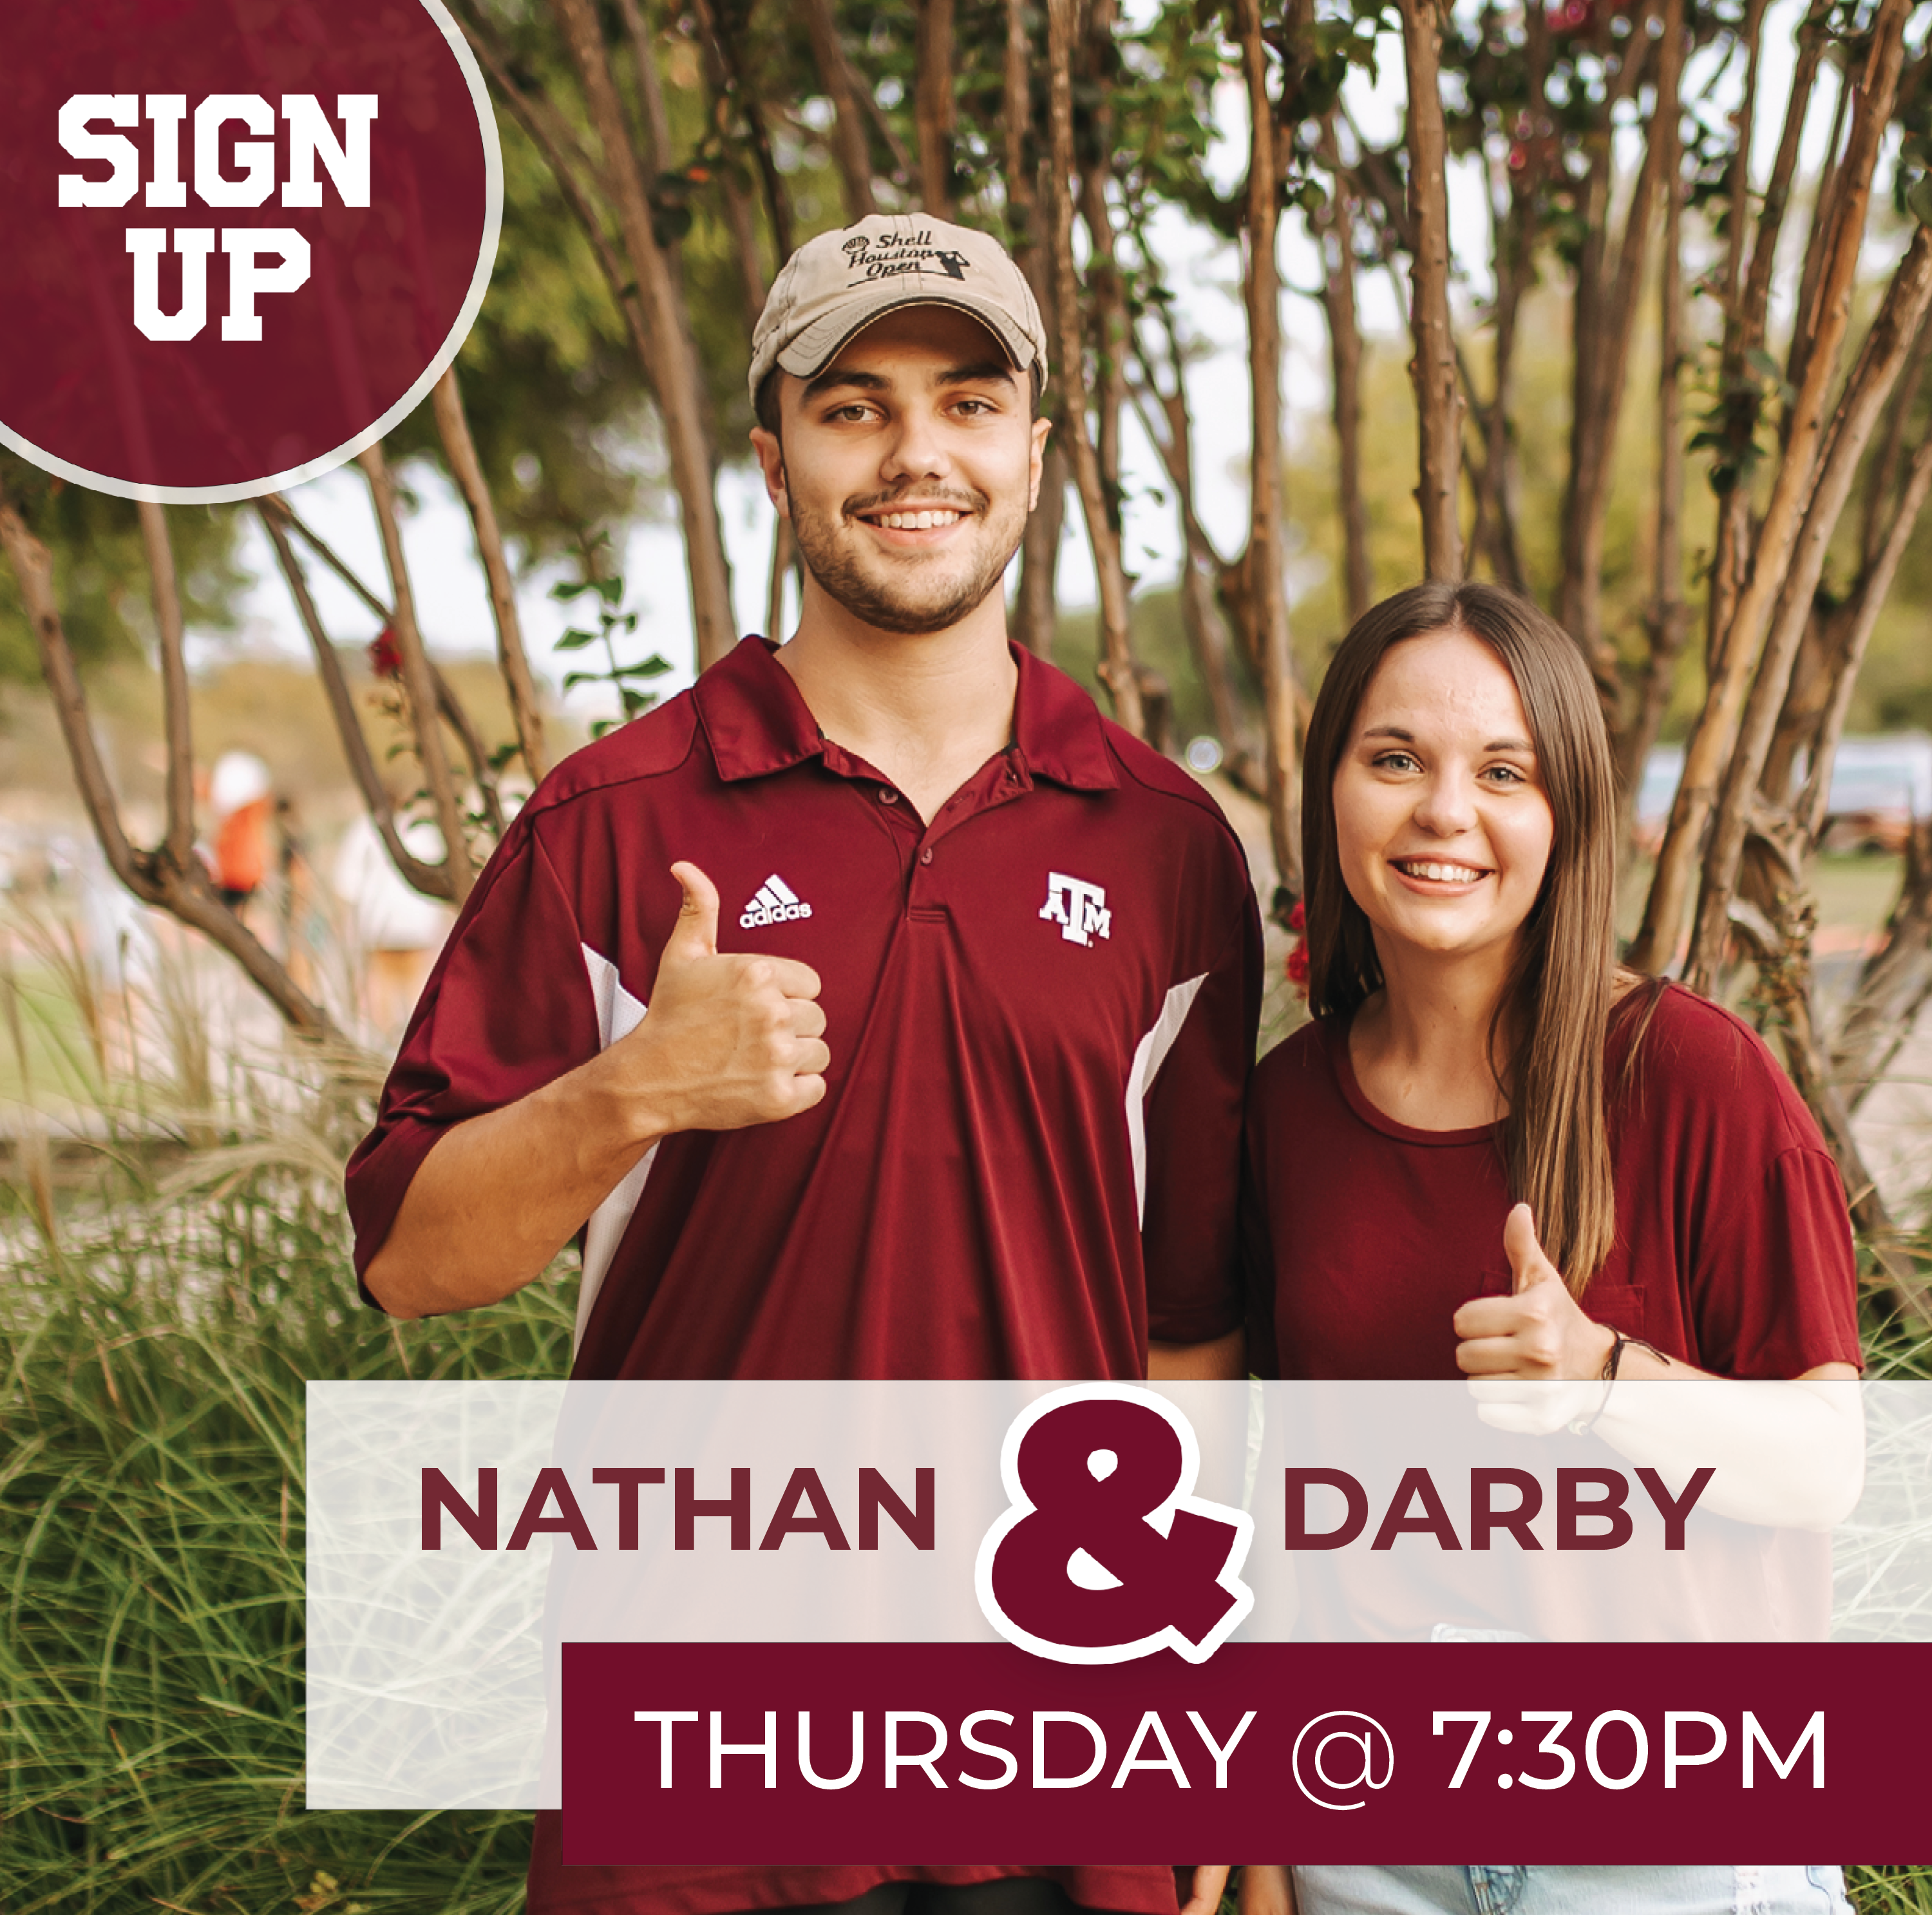 Nathan & Darby